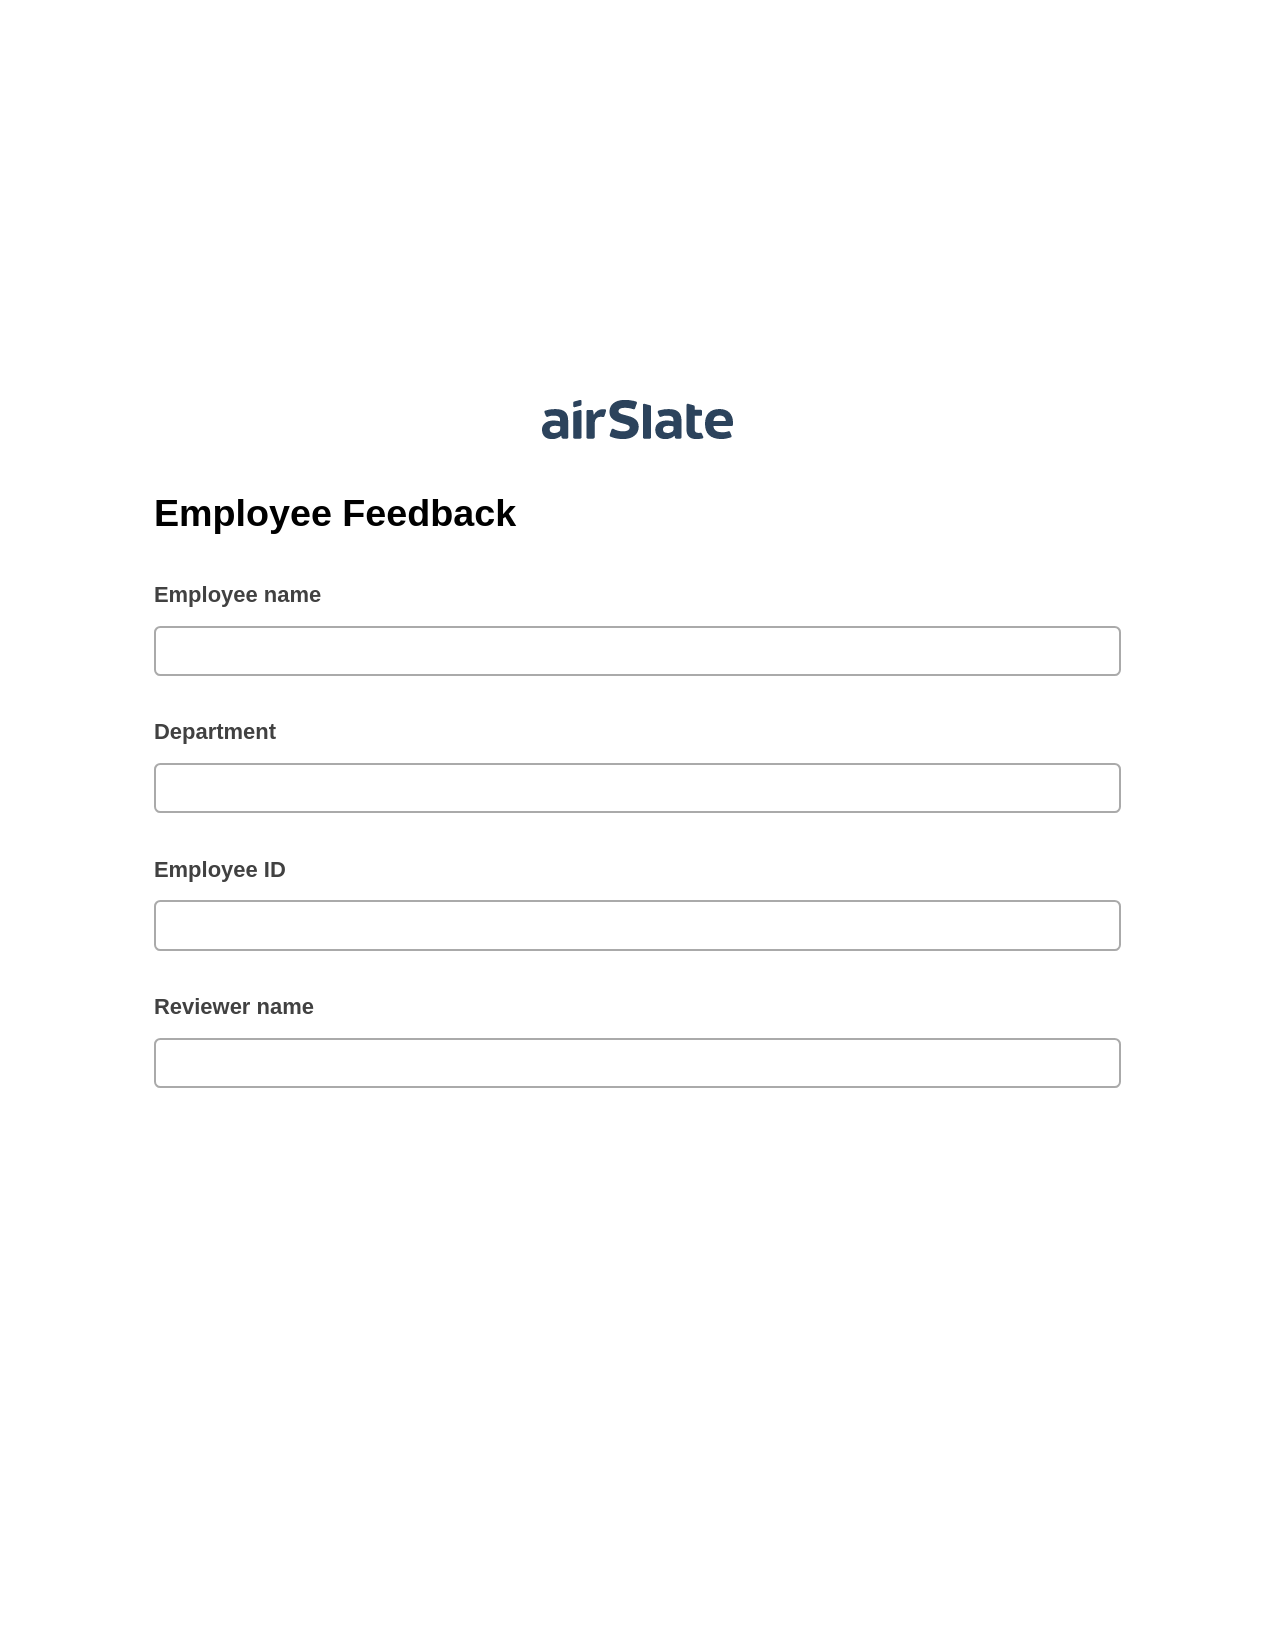 Multirole Employee Feedback Pre-fill Slate from MS Dynamics 365 Records Bot, In-person Signing Bot, Google Drive Bot